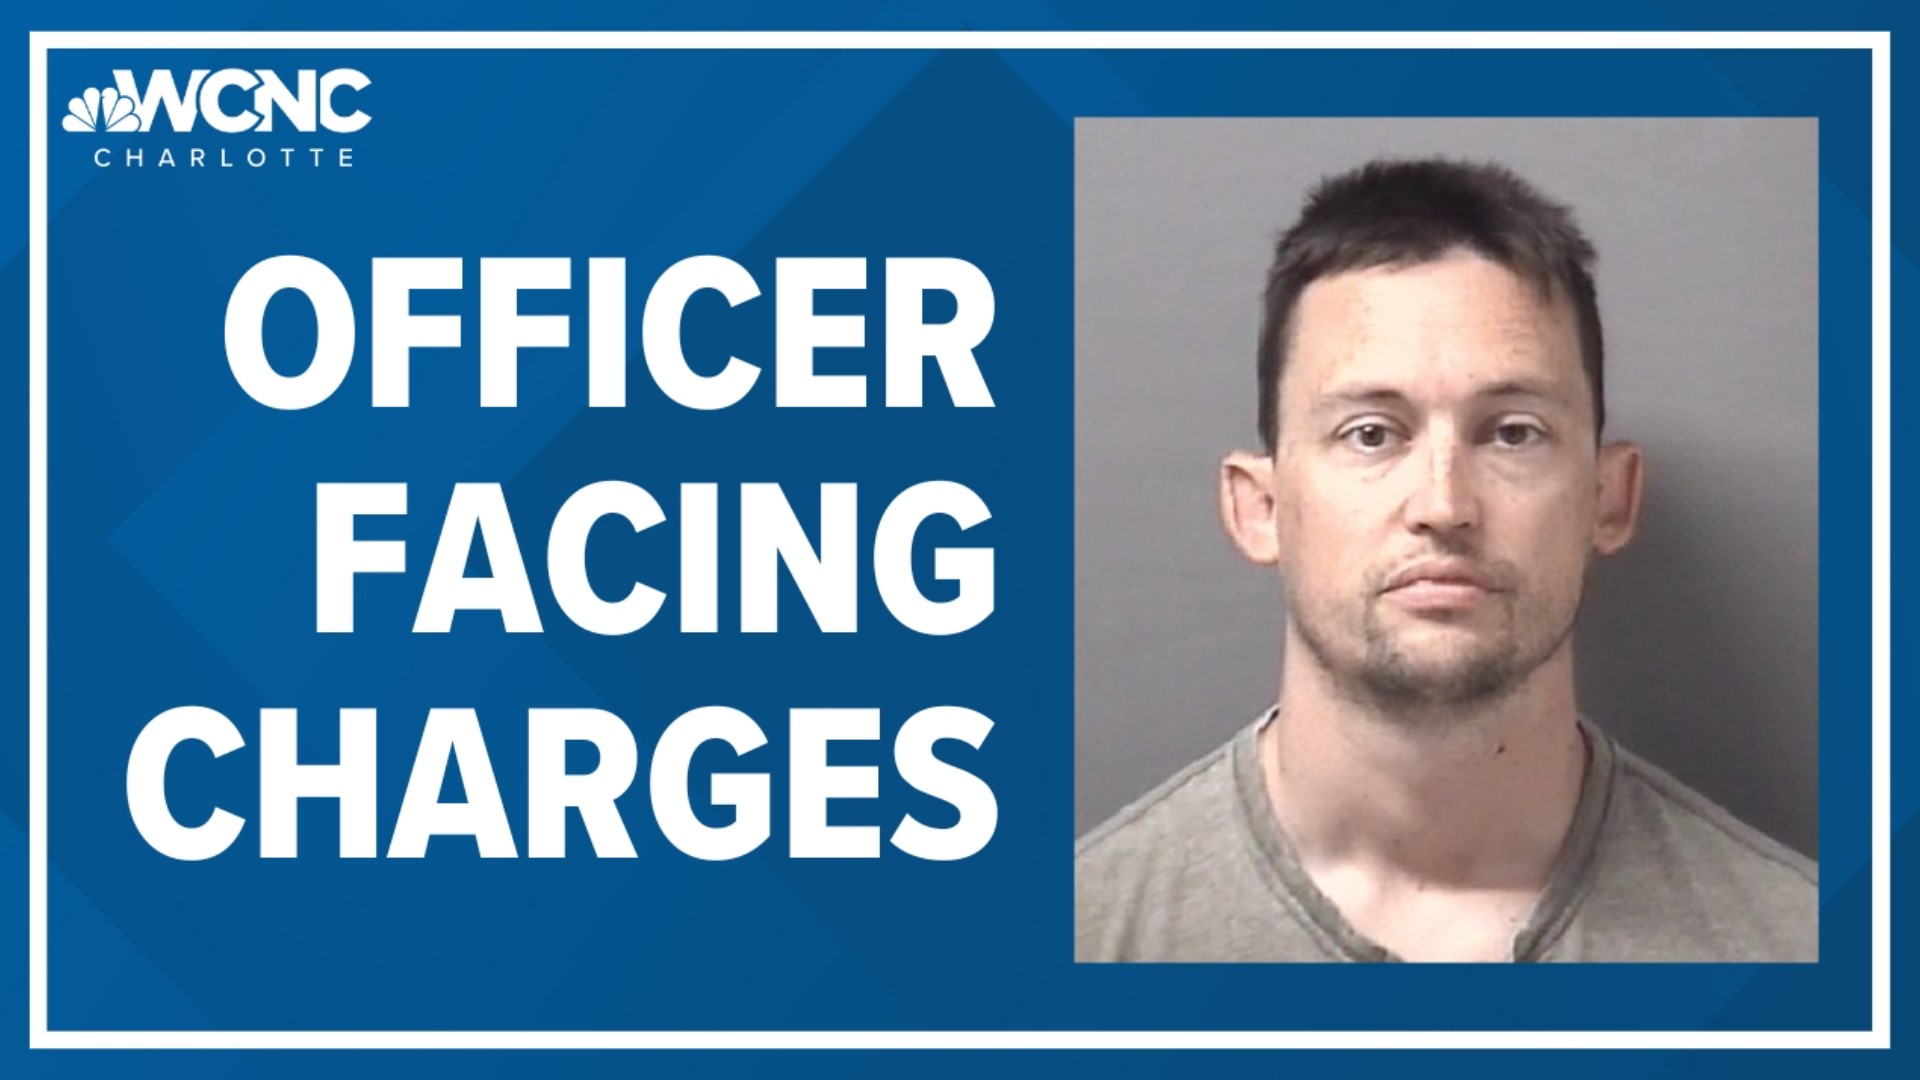 A Mooresville Police officer has been arrested and charged with four counts of sexual exploitation of a minor, according to the Mooresville Police Department.